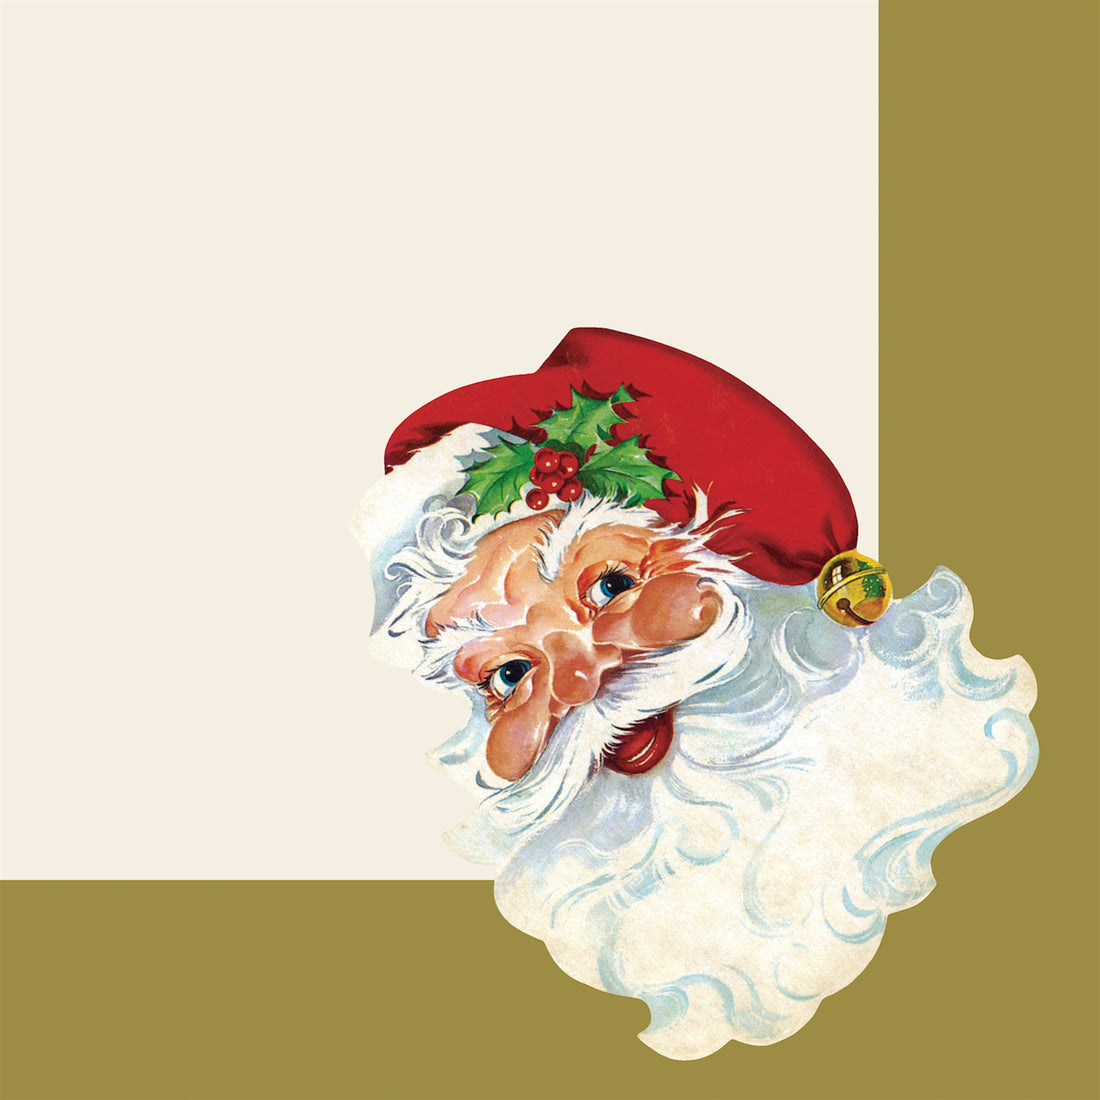 A square, cream cocktail napkin with gold right and bottom edges, featuring a vintage-style illustration of Santa Clause&